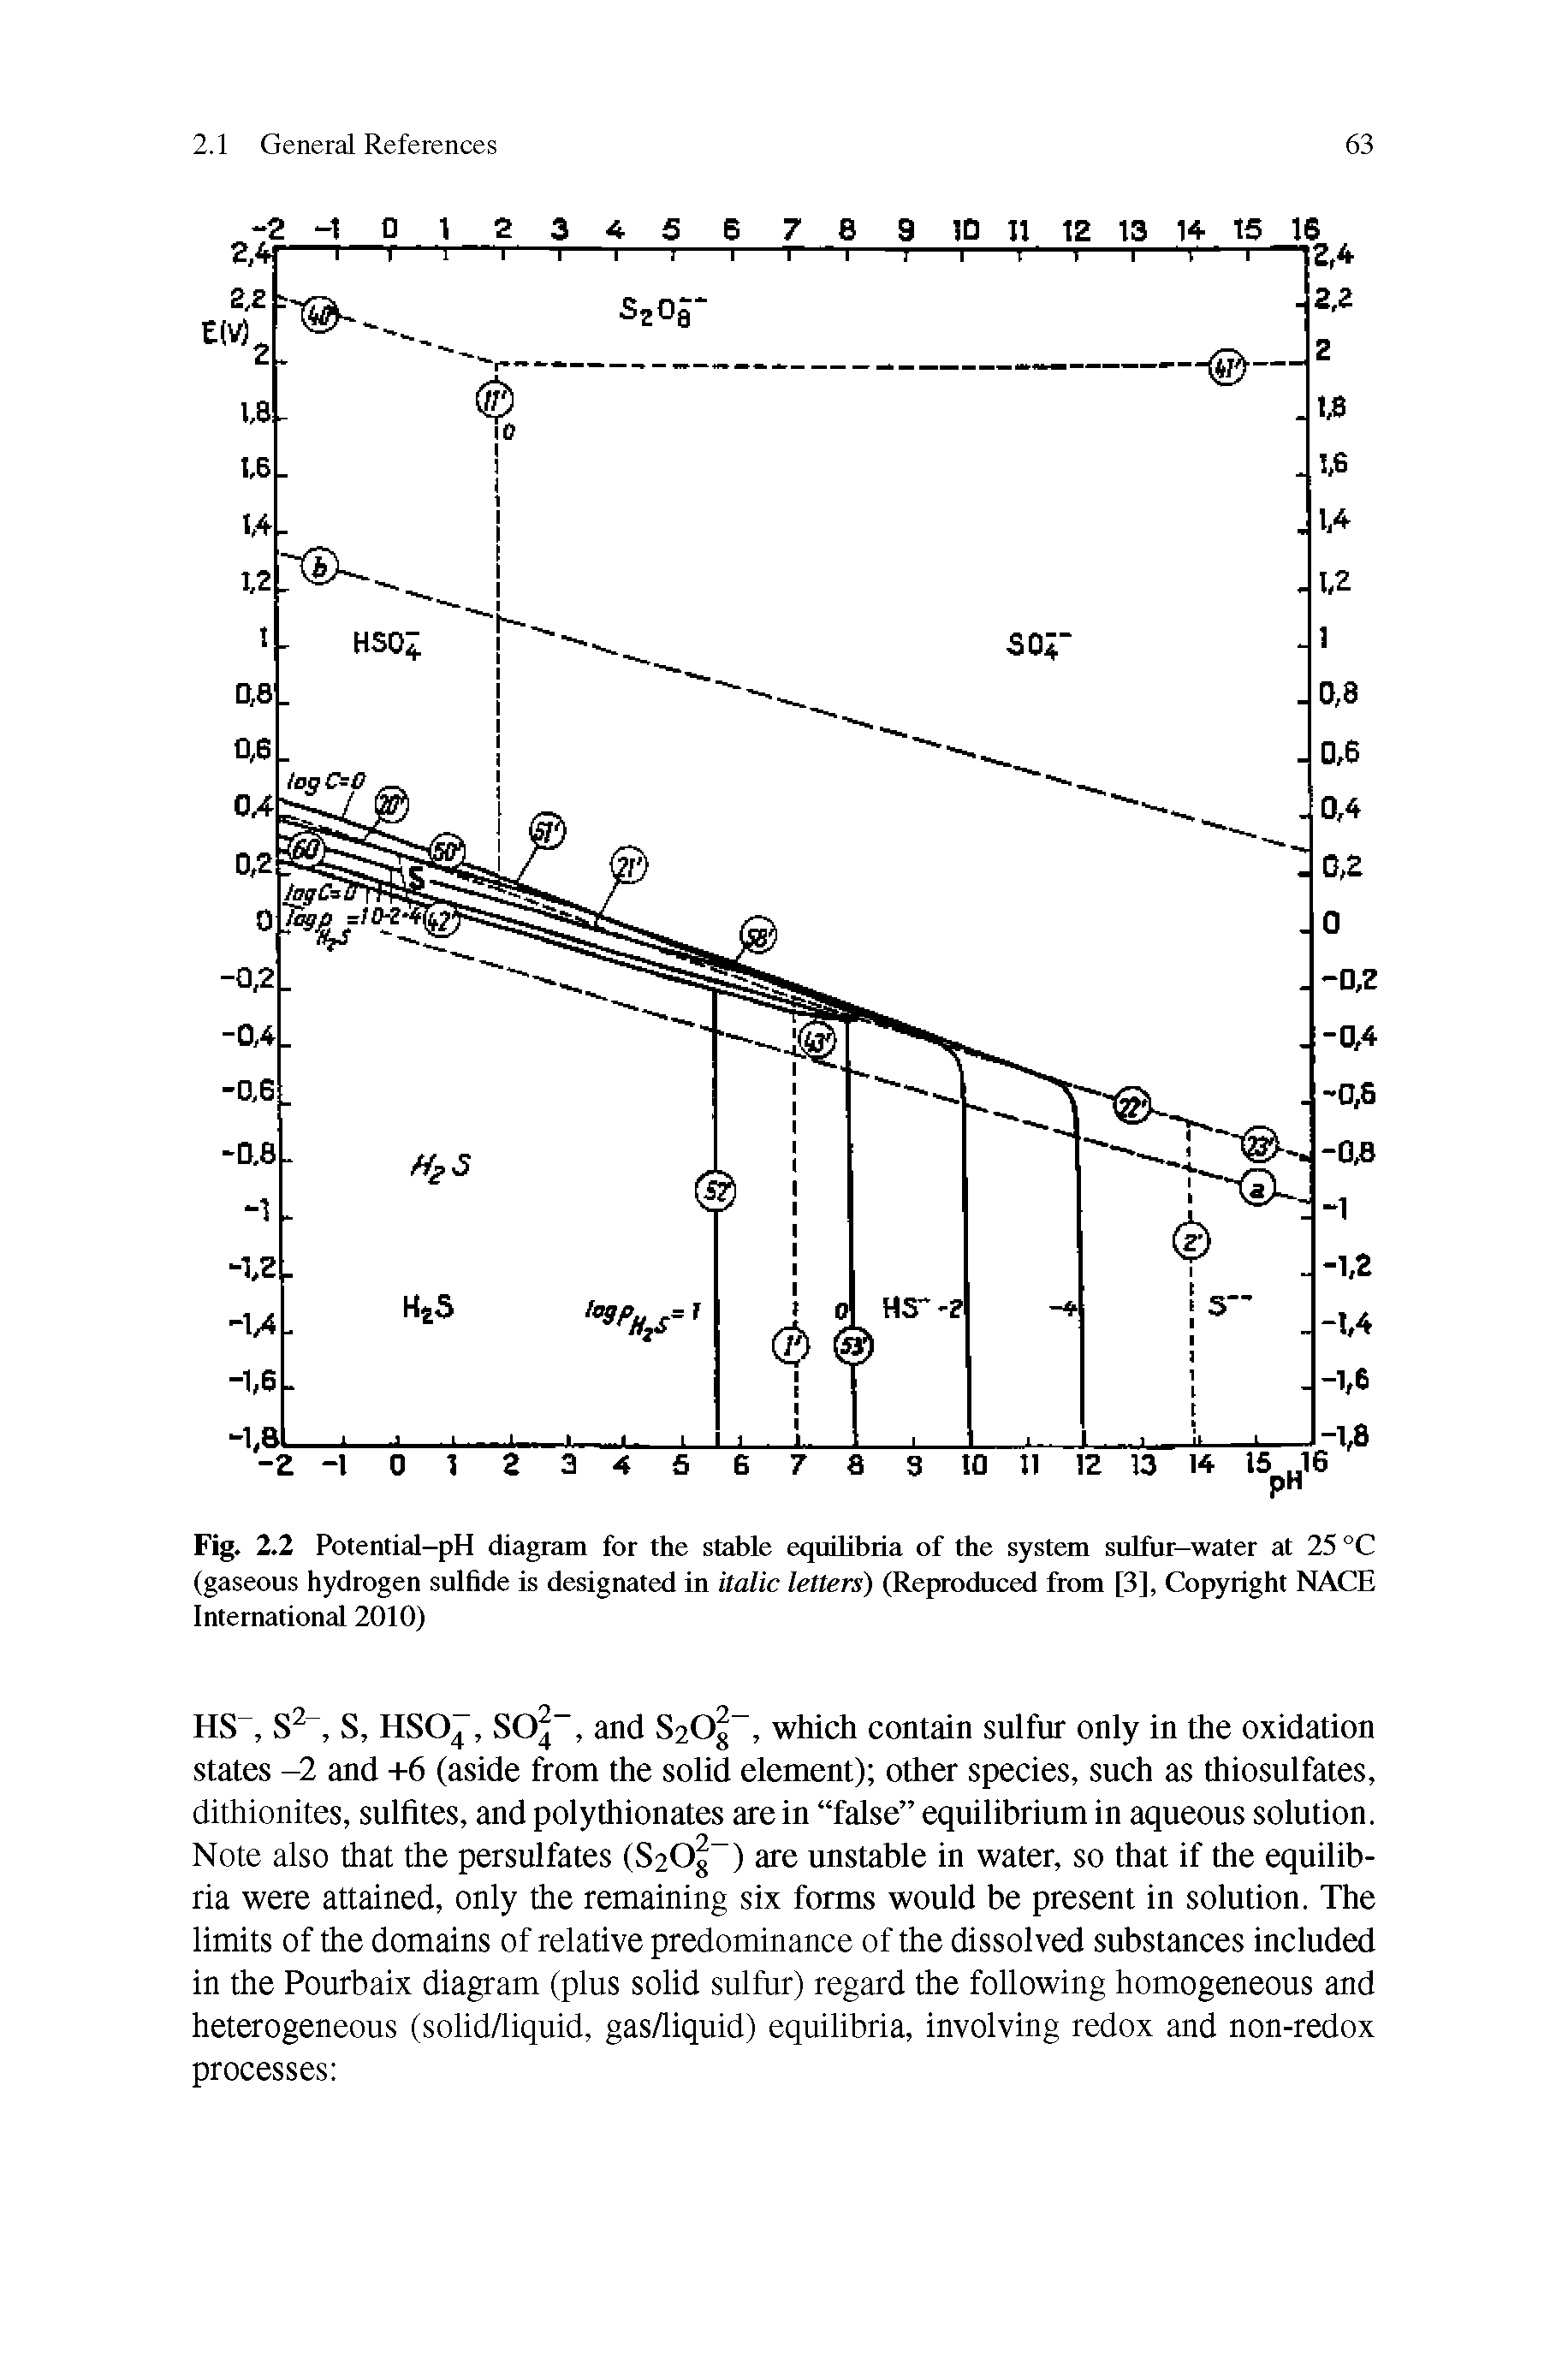 Fig. 2.2 Potential-pH diagram for the stable equilibria of the system sulfur-water at 25 °C (gaseous hydrogen sulfide is designated in italic letters) (Reproduced from [3], Copyright NACE International 2010)...